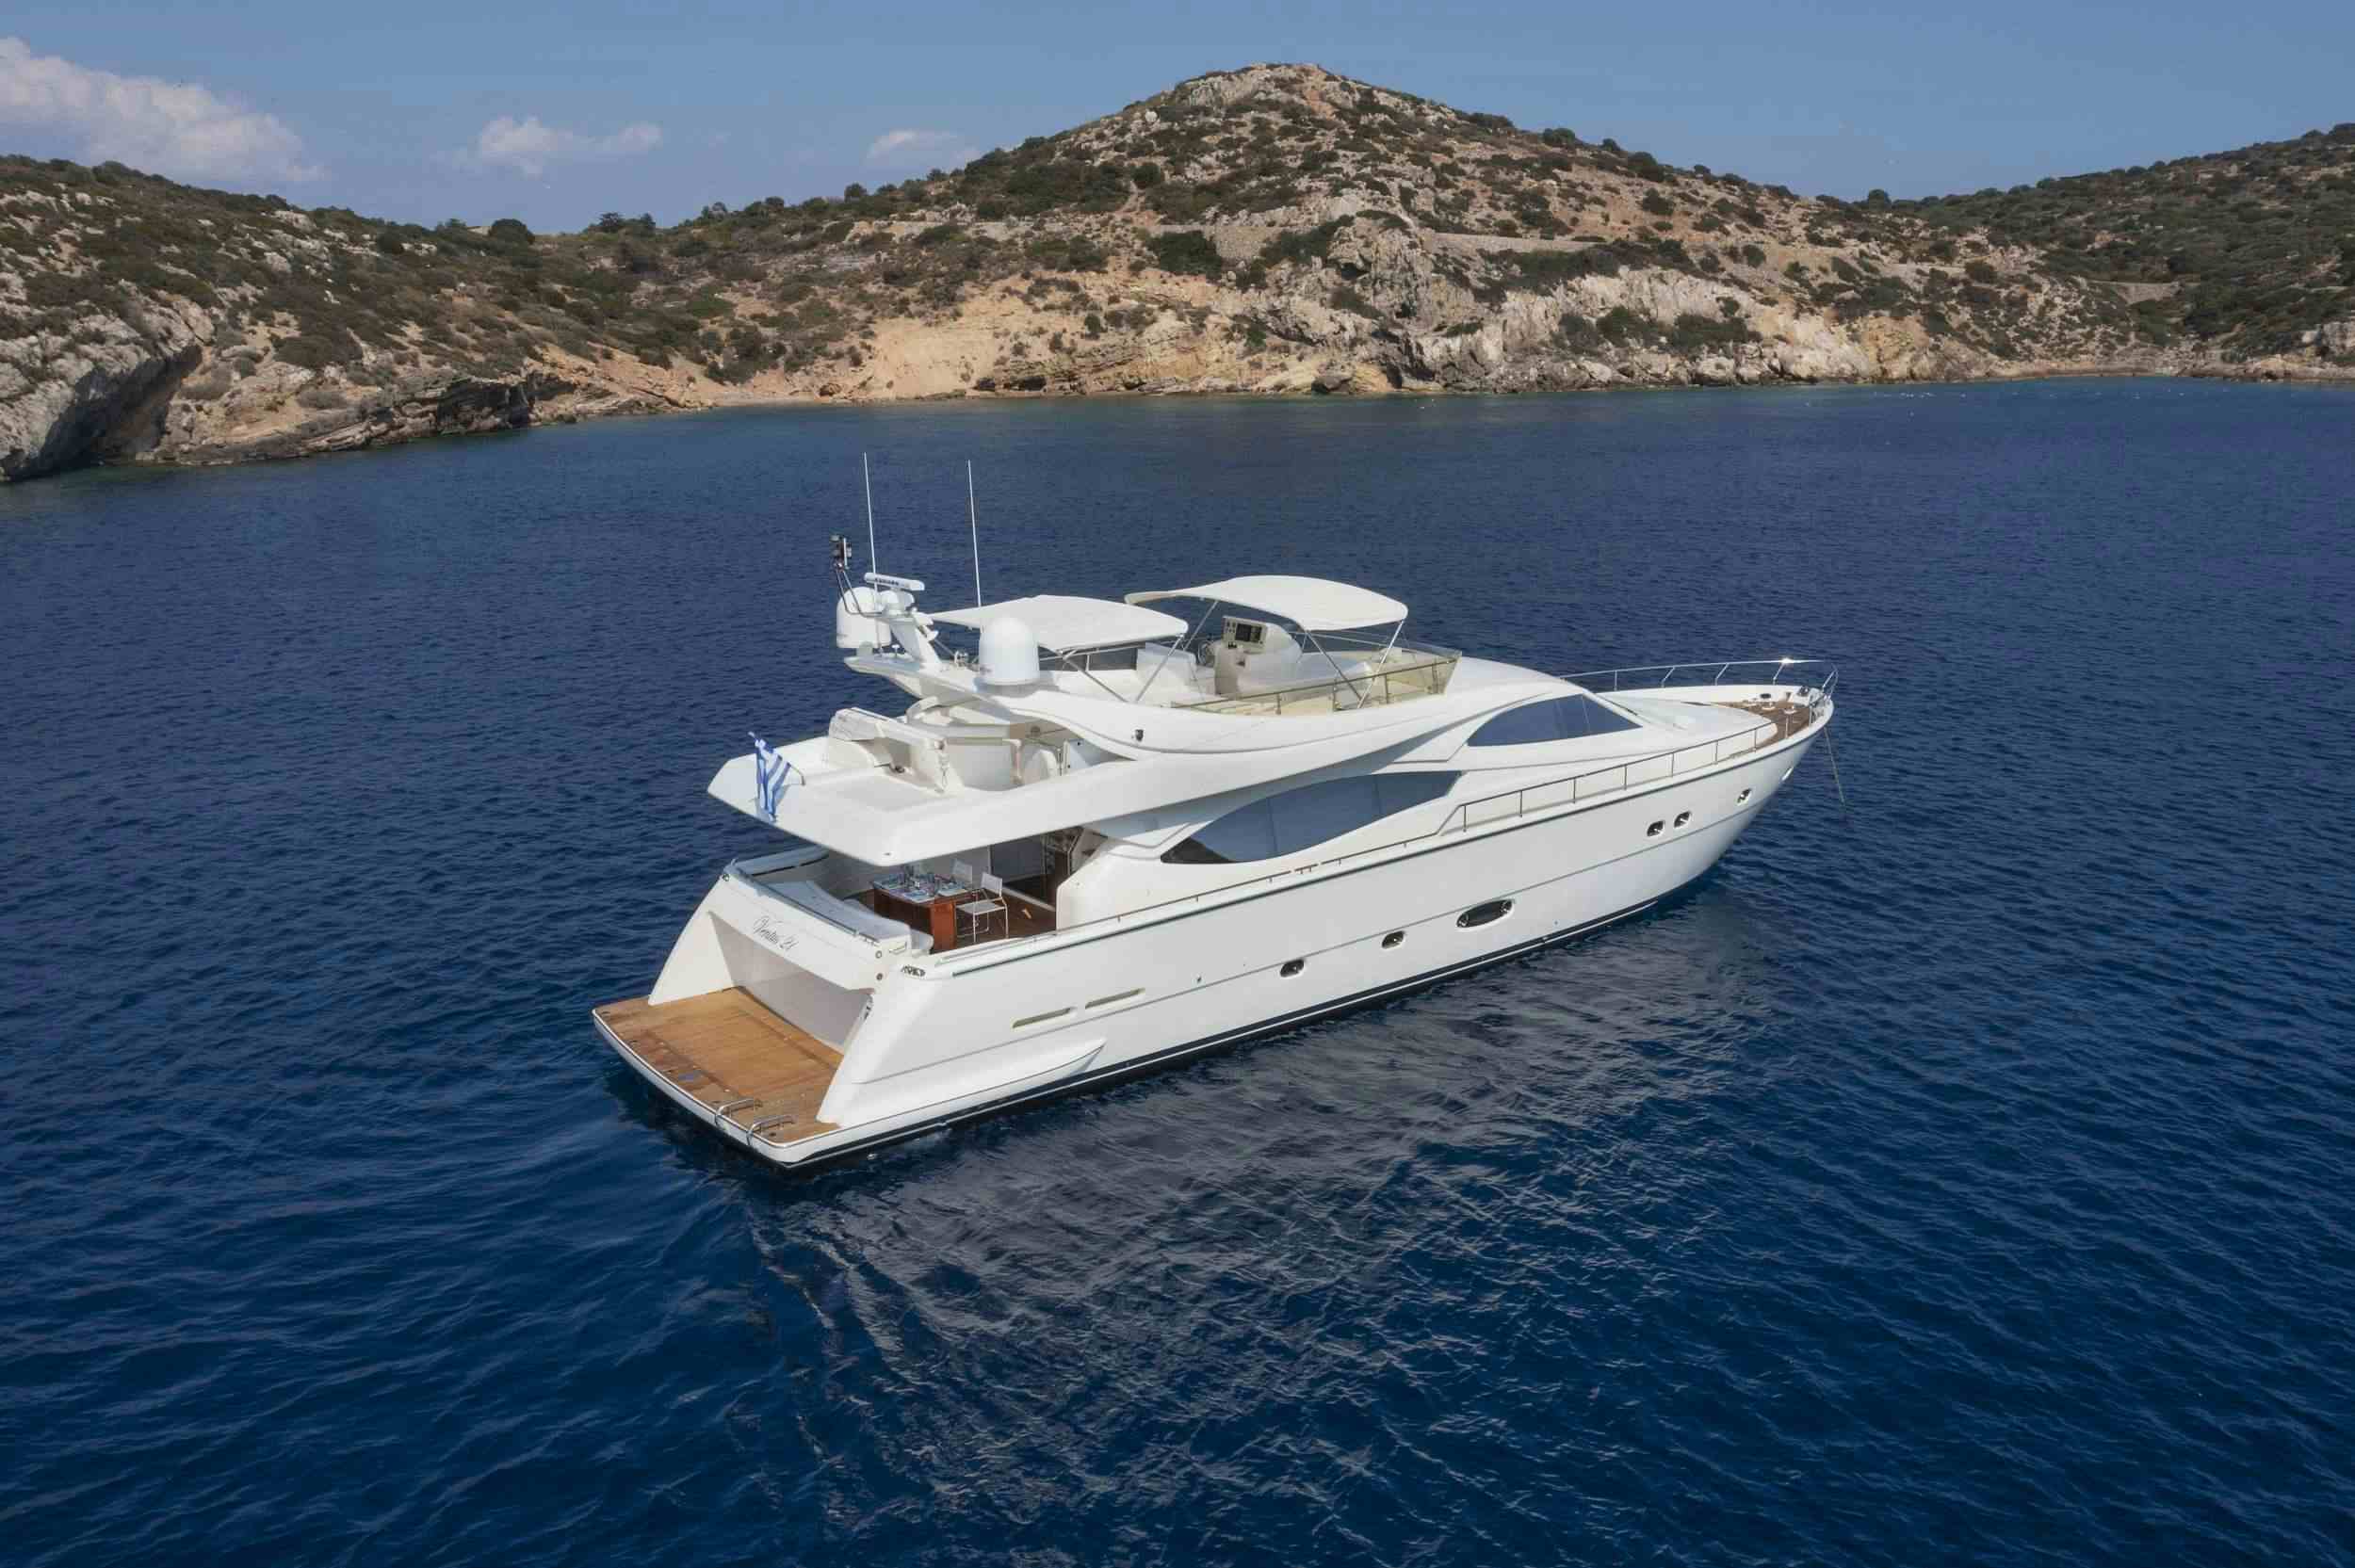 Ventus 21 - Yacht Charter Rhodes & Boat hire in Greece 1